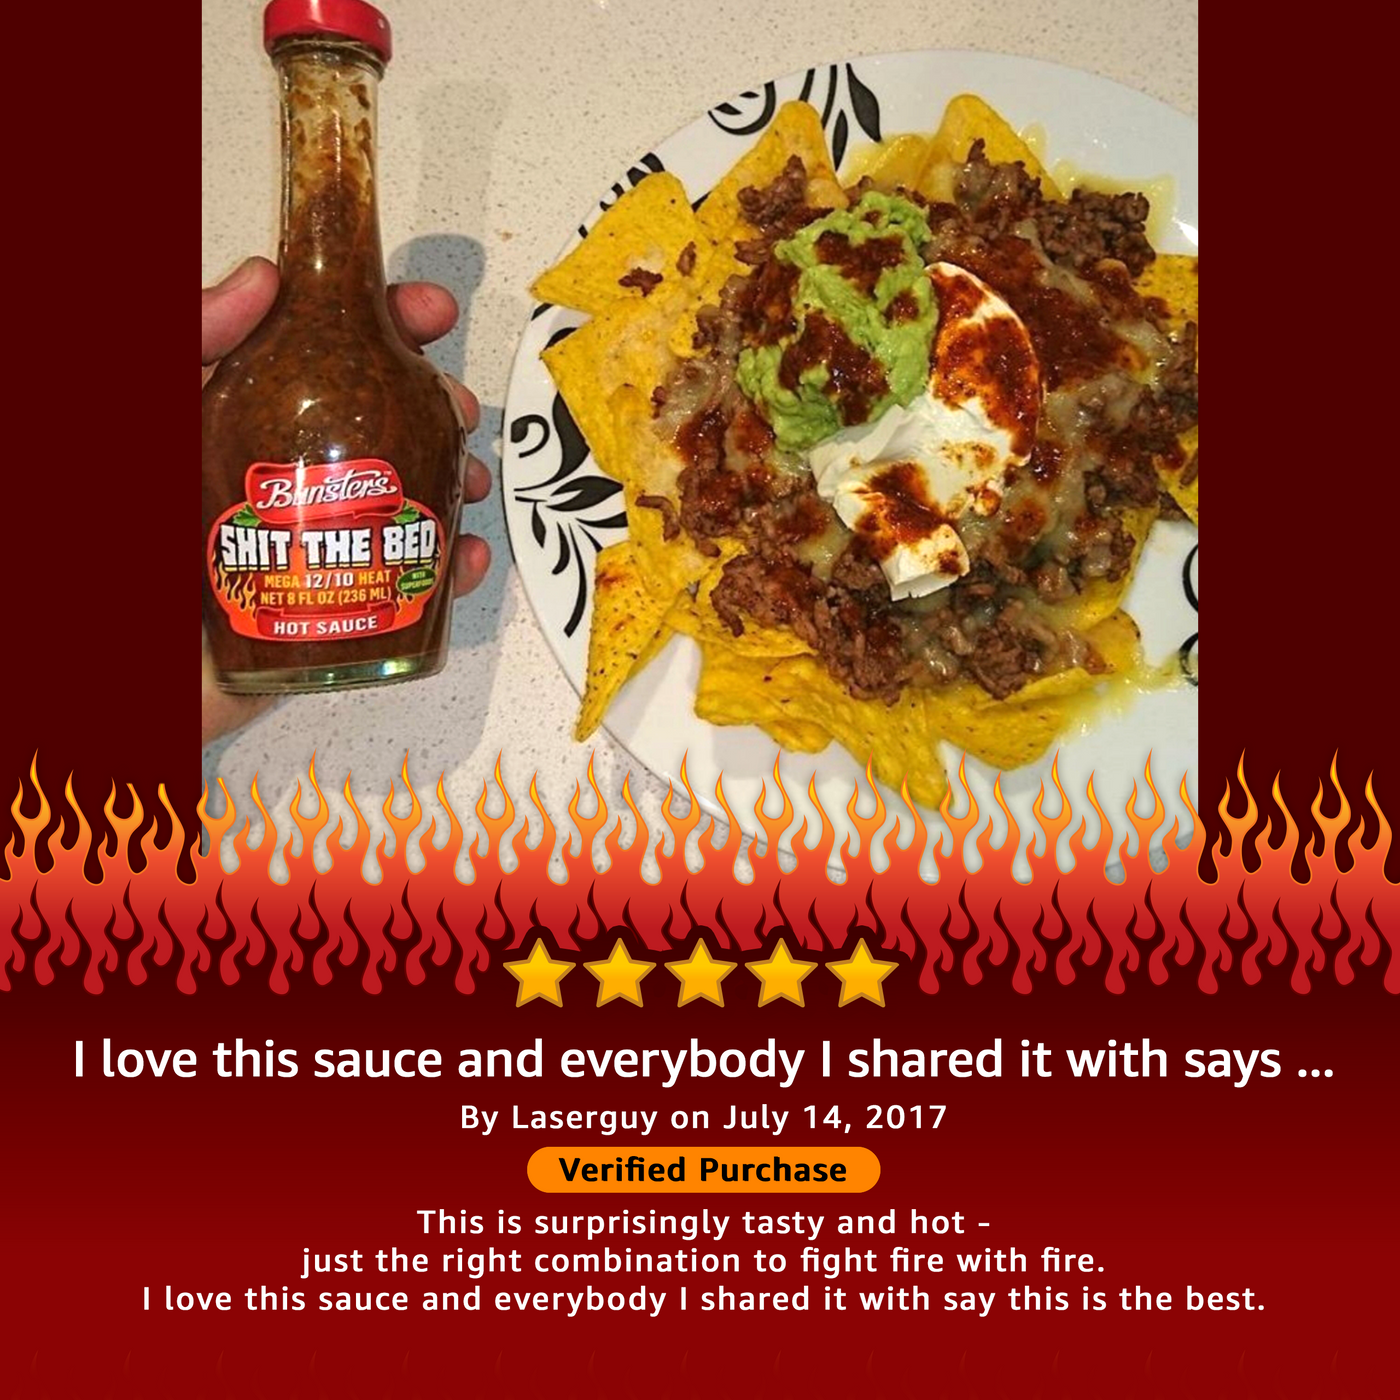 1 x Spicy Ketchup (6/10 Heat) – Bunsters Worldwide